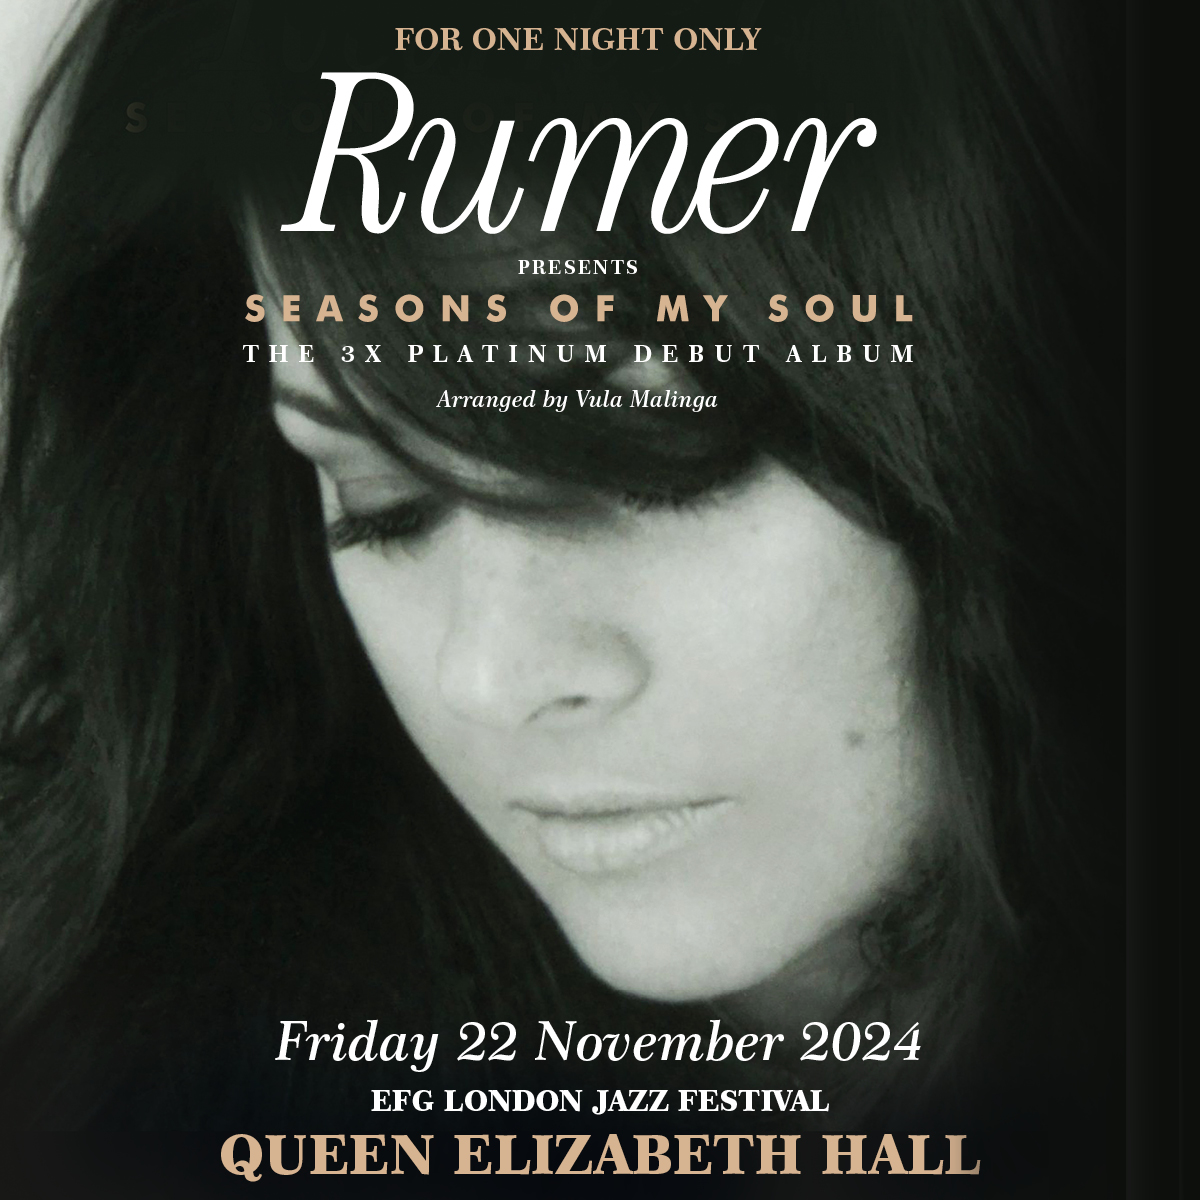 As part of EFG @LondonJazzFest, @Rumersongs will celebrate her multi-platinum-selling debut album 'Seasons Of My Soul' with a very special performance at the Queen Elizabeth Hall this November! Tickets are on sale now 👉 tinyurl.com/4h9epubv